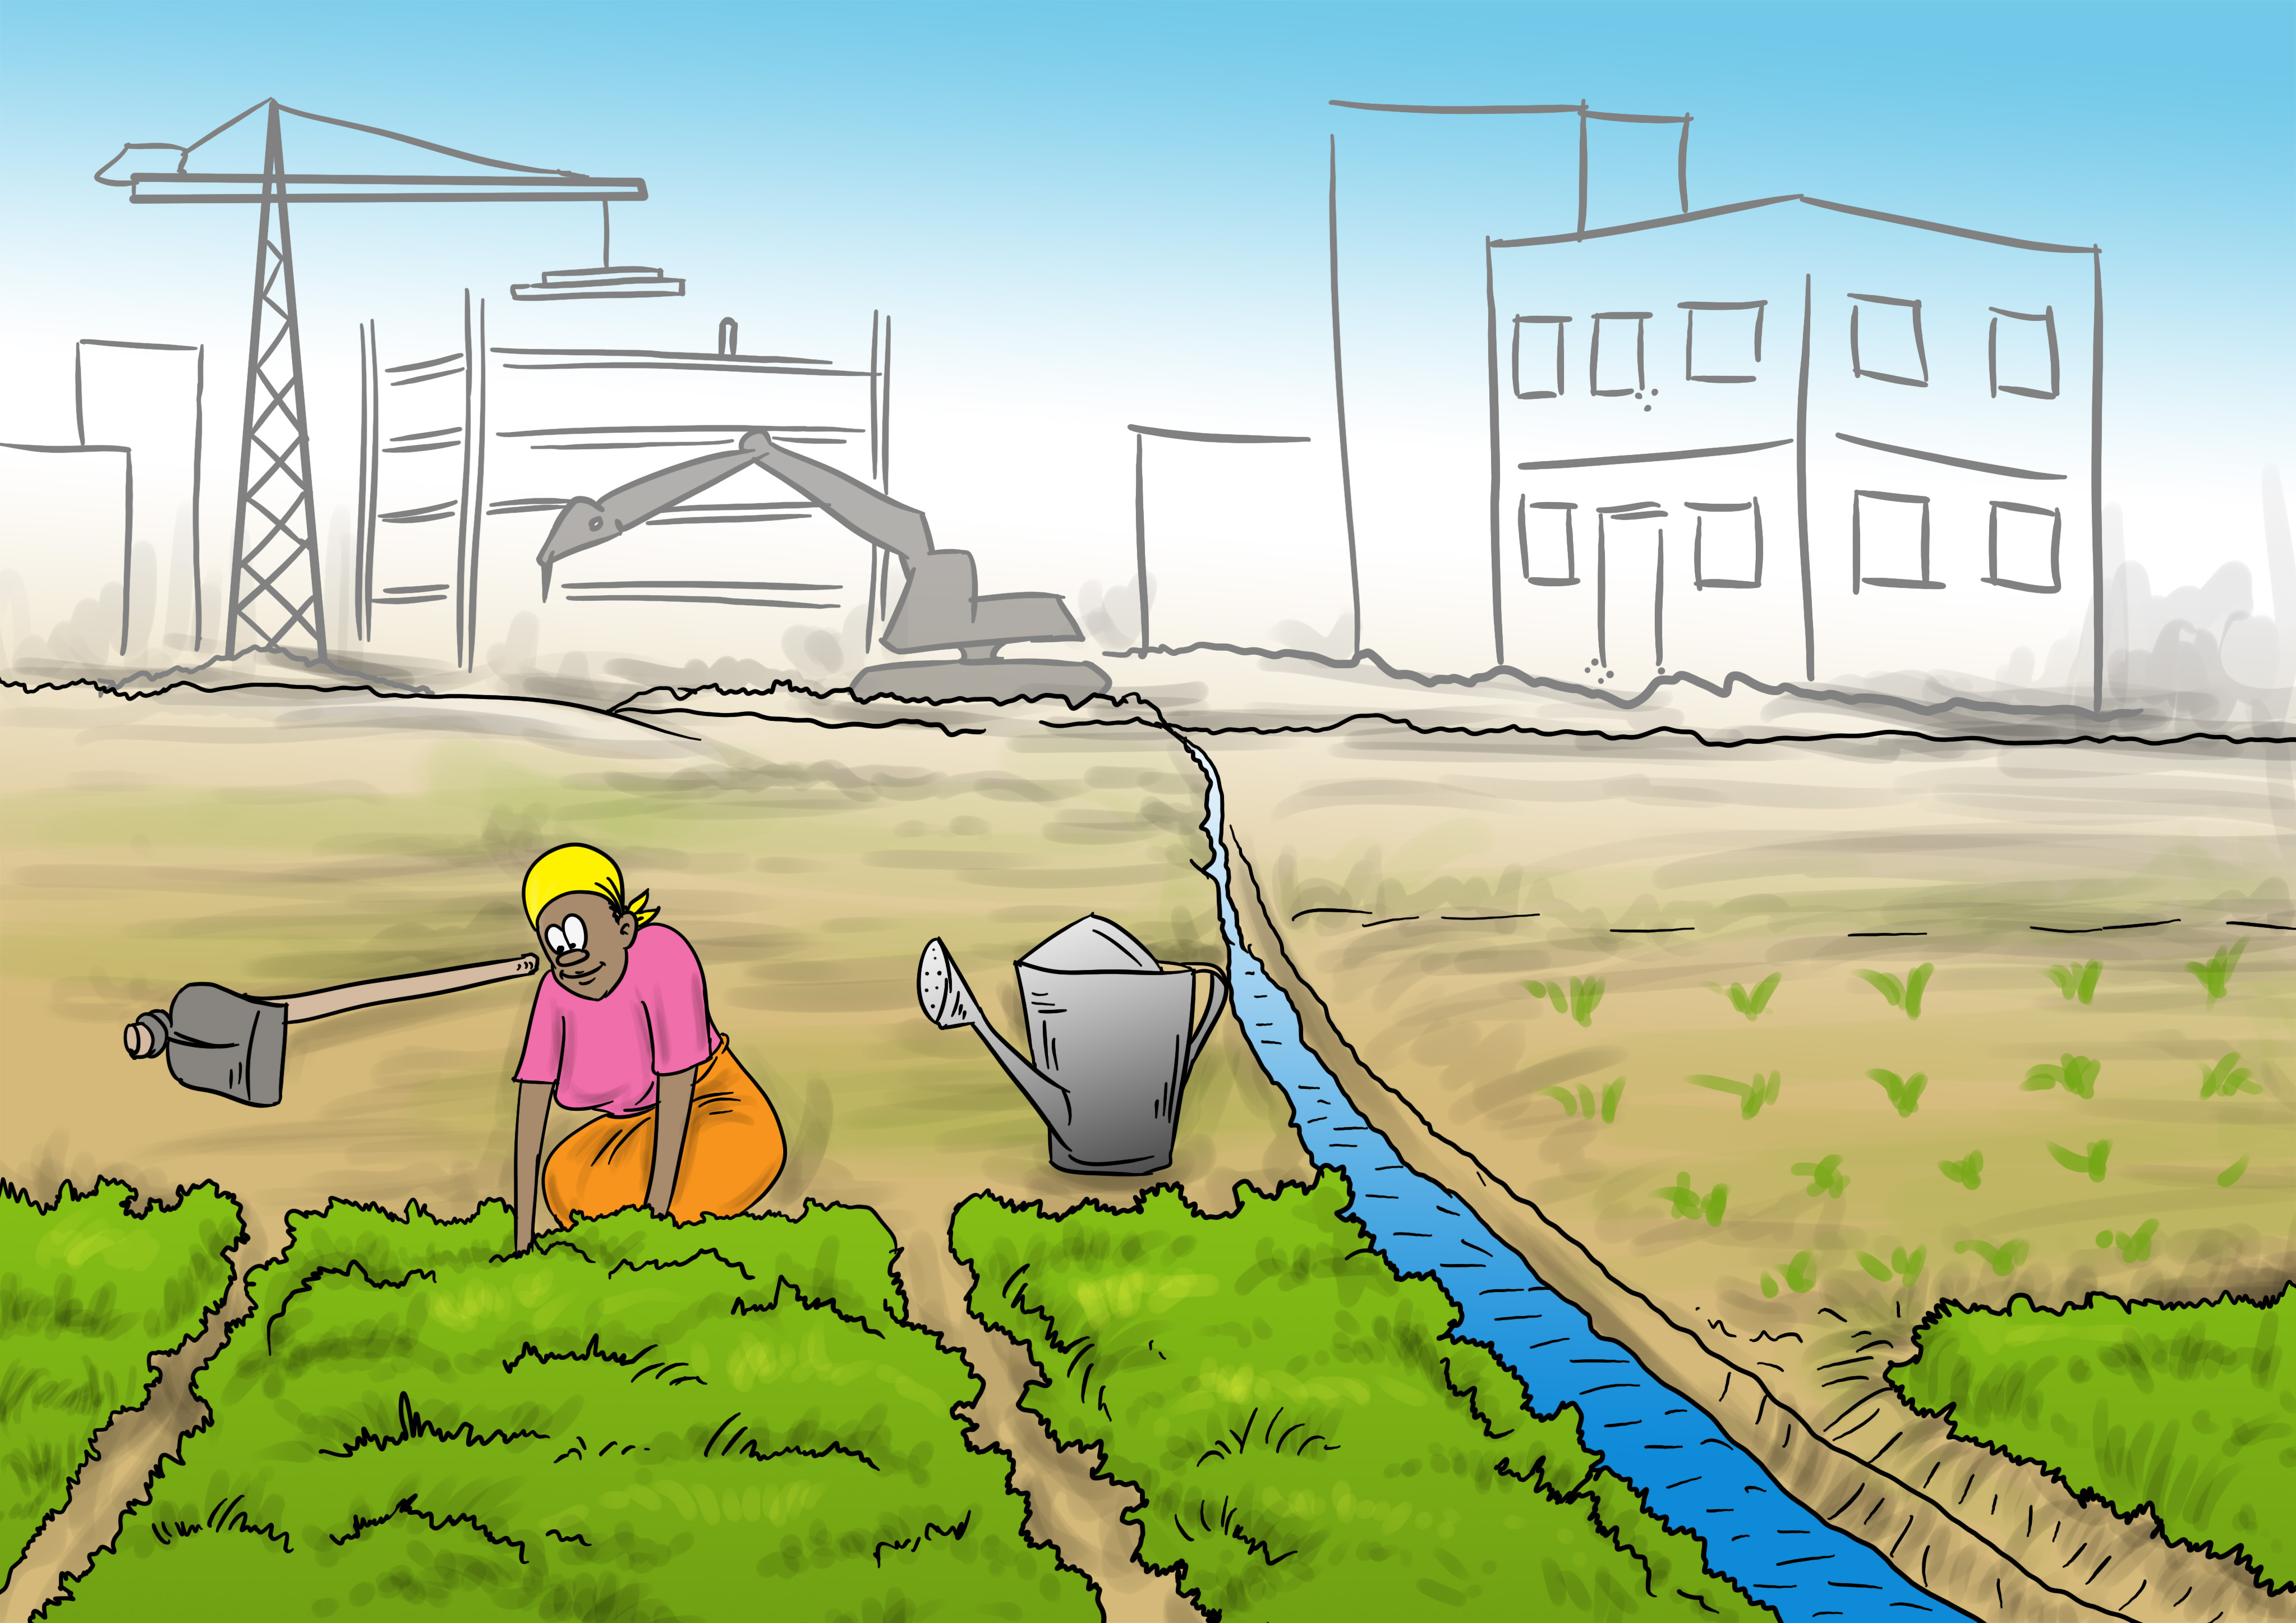 Sociotechnical configurations for managing water reuse in urban agriculture  - WUR